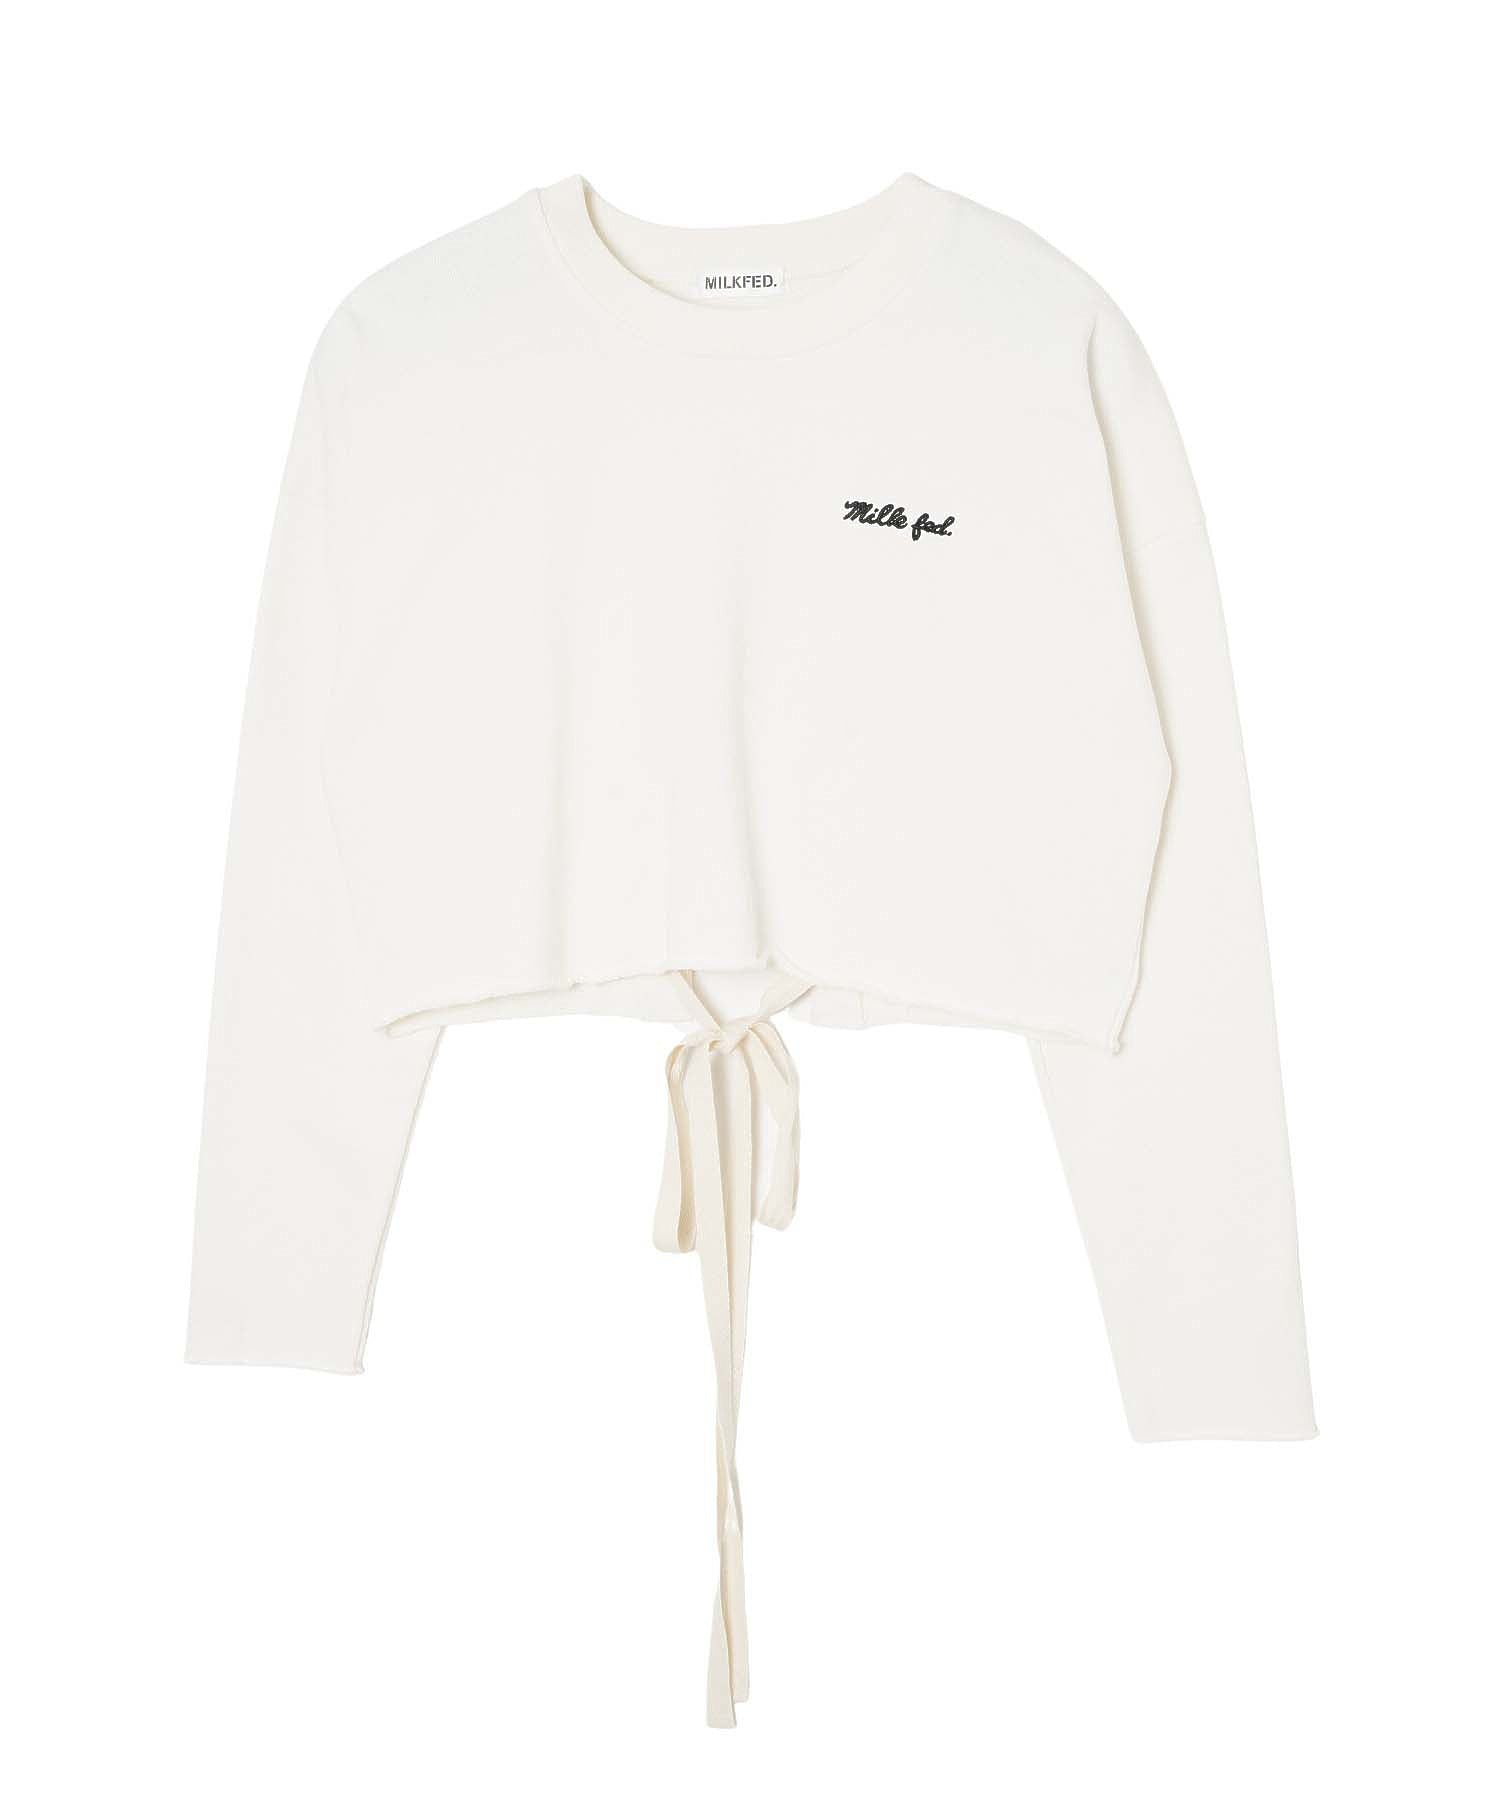 LACE UP SWEAT TOP MILKFED.